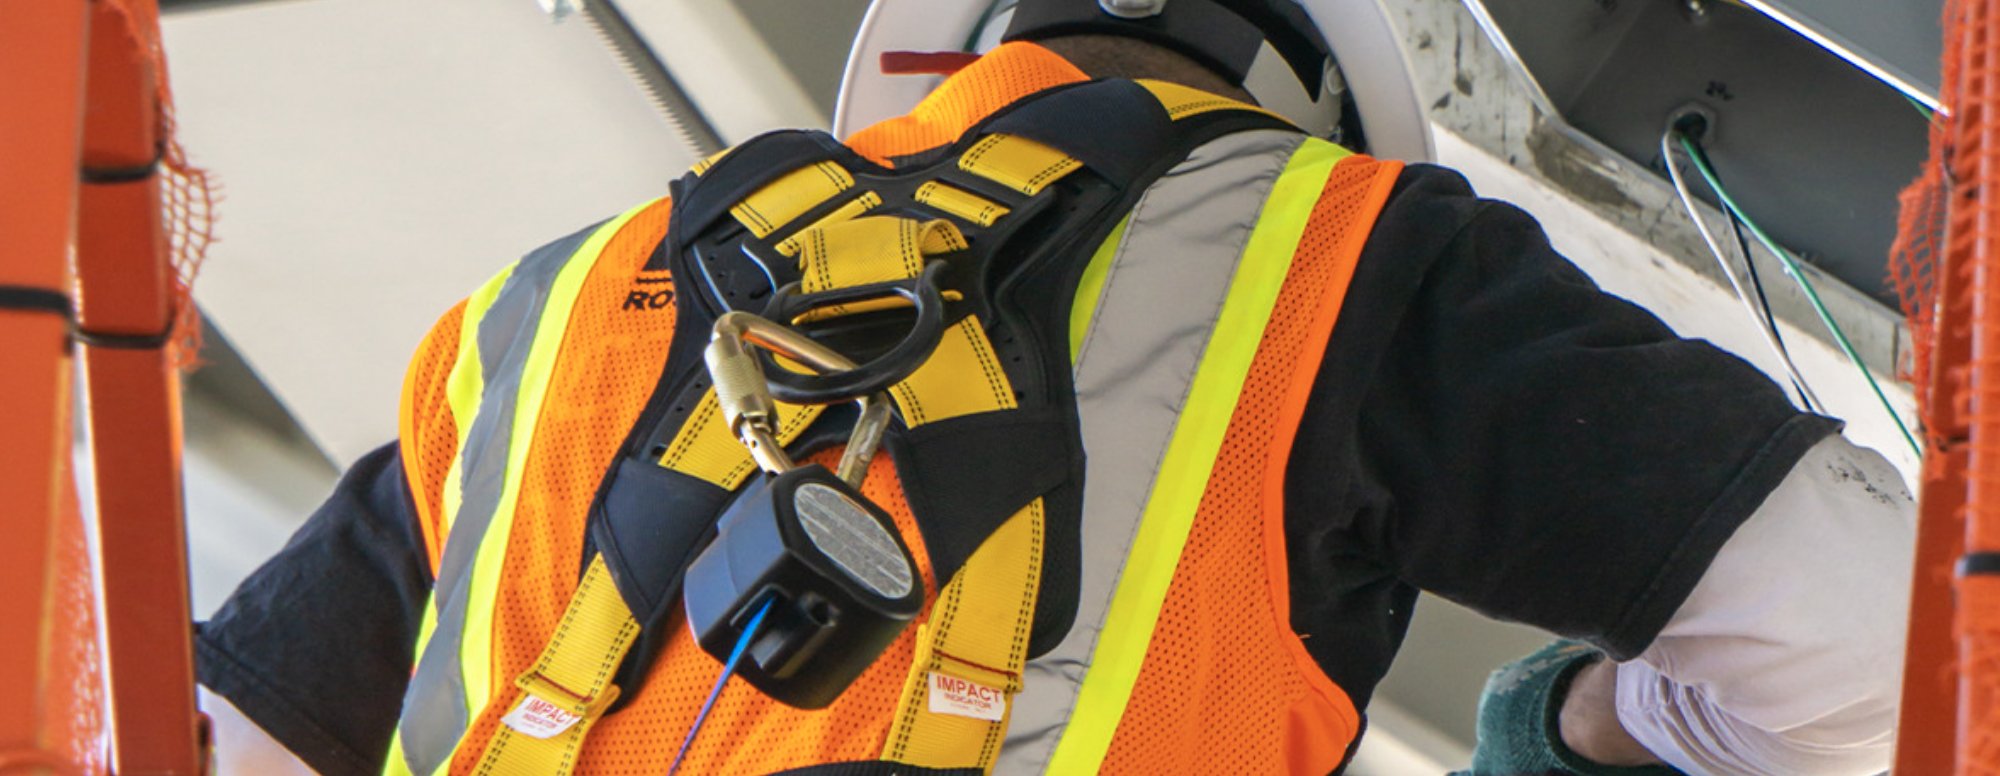 Harnesses on a Construction Jobsite | WRYKER Construction Supply